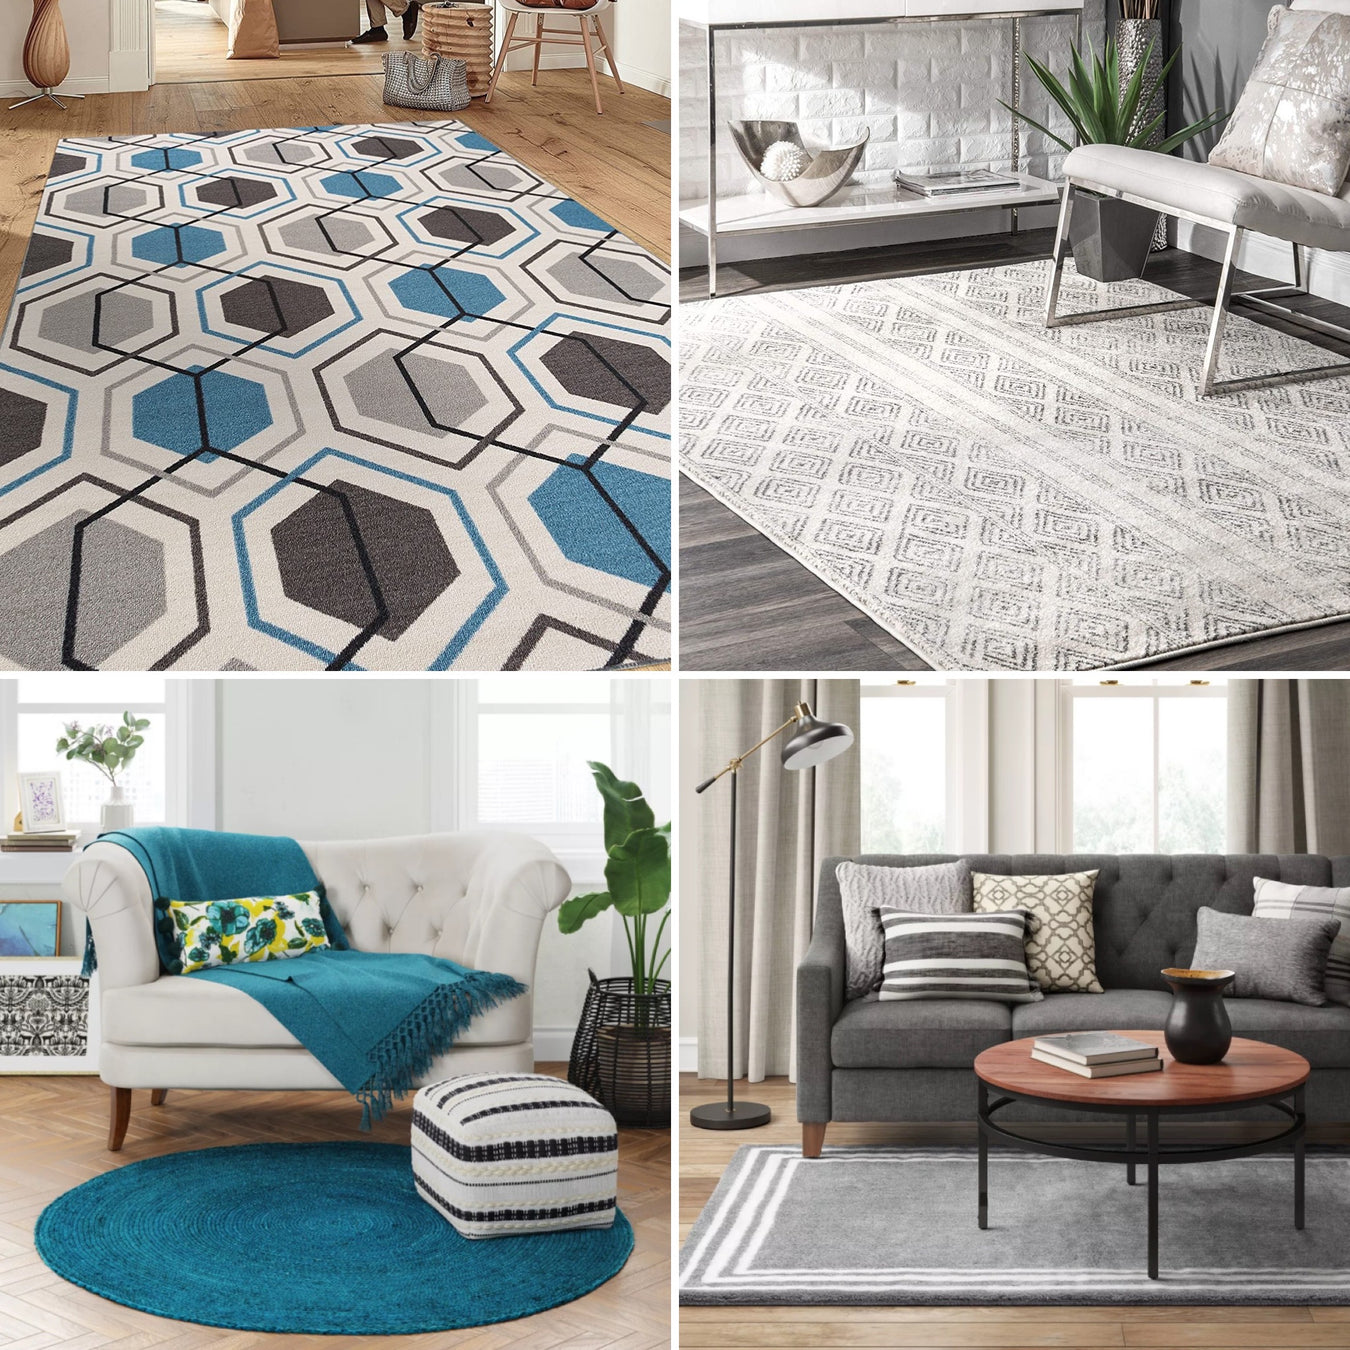 Hot Deal! Designer 5x8 Area Rugs $75 Each - Limited Qty!